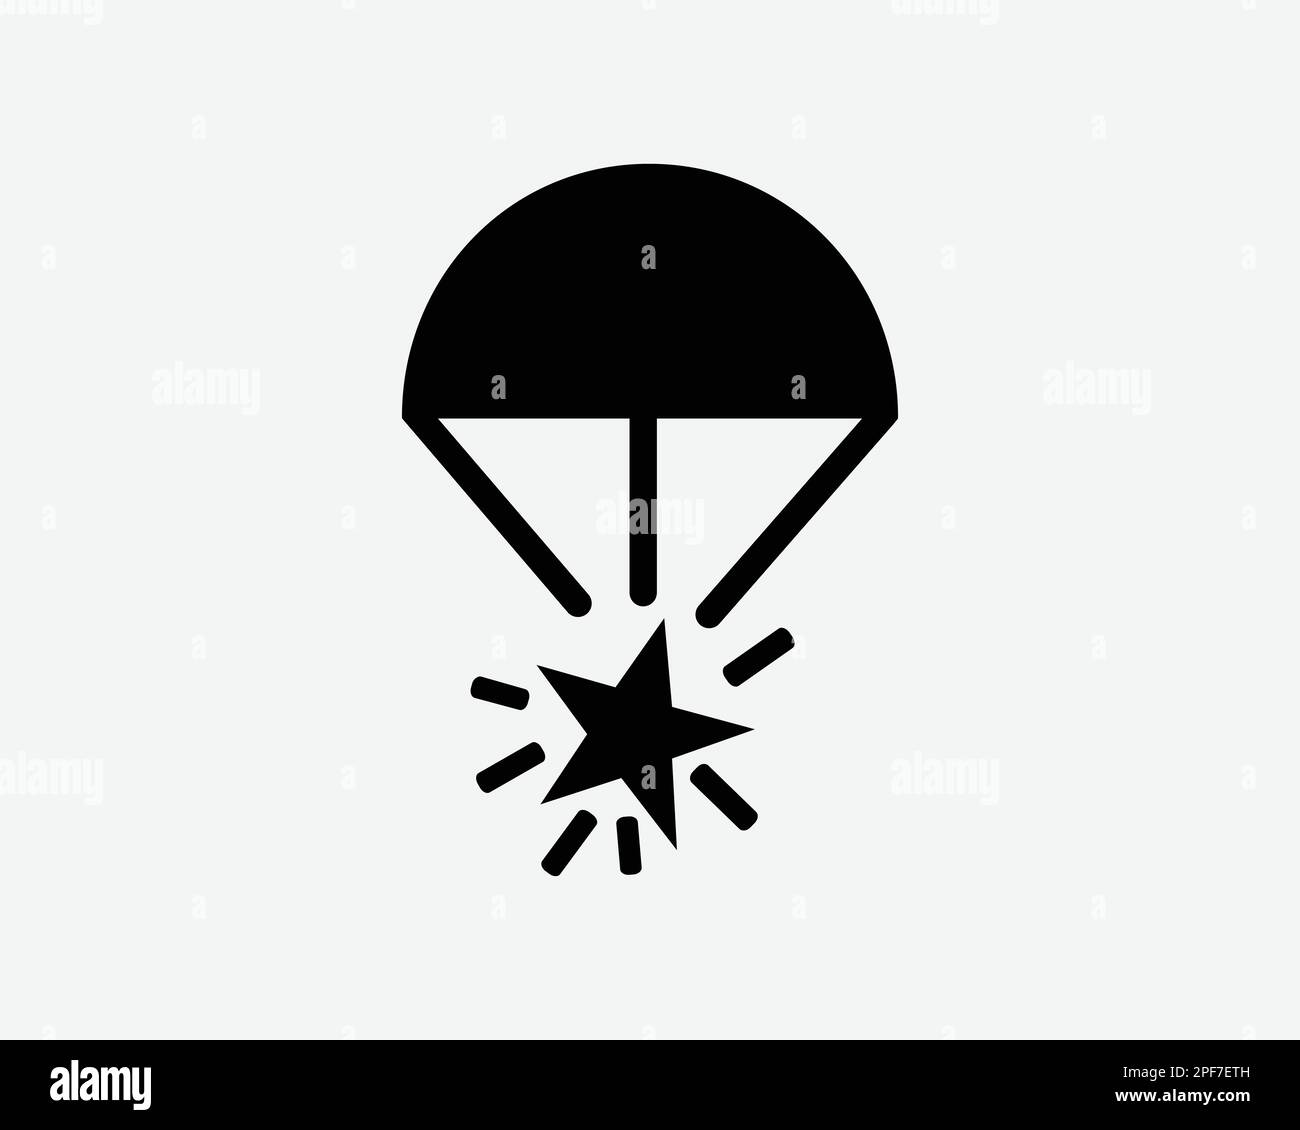 Parachute Flare Star Rocket Emergency Rescue Black White Silhouette Sign Symbol Icon Graphic Clipart Artwork Illustration Pictogram Vector Stock Vector